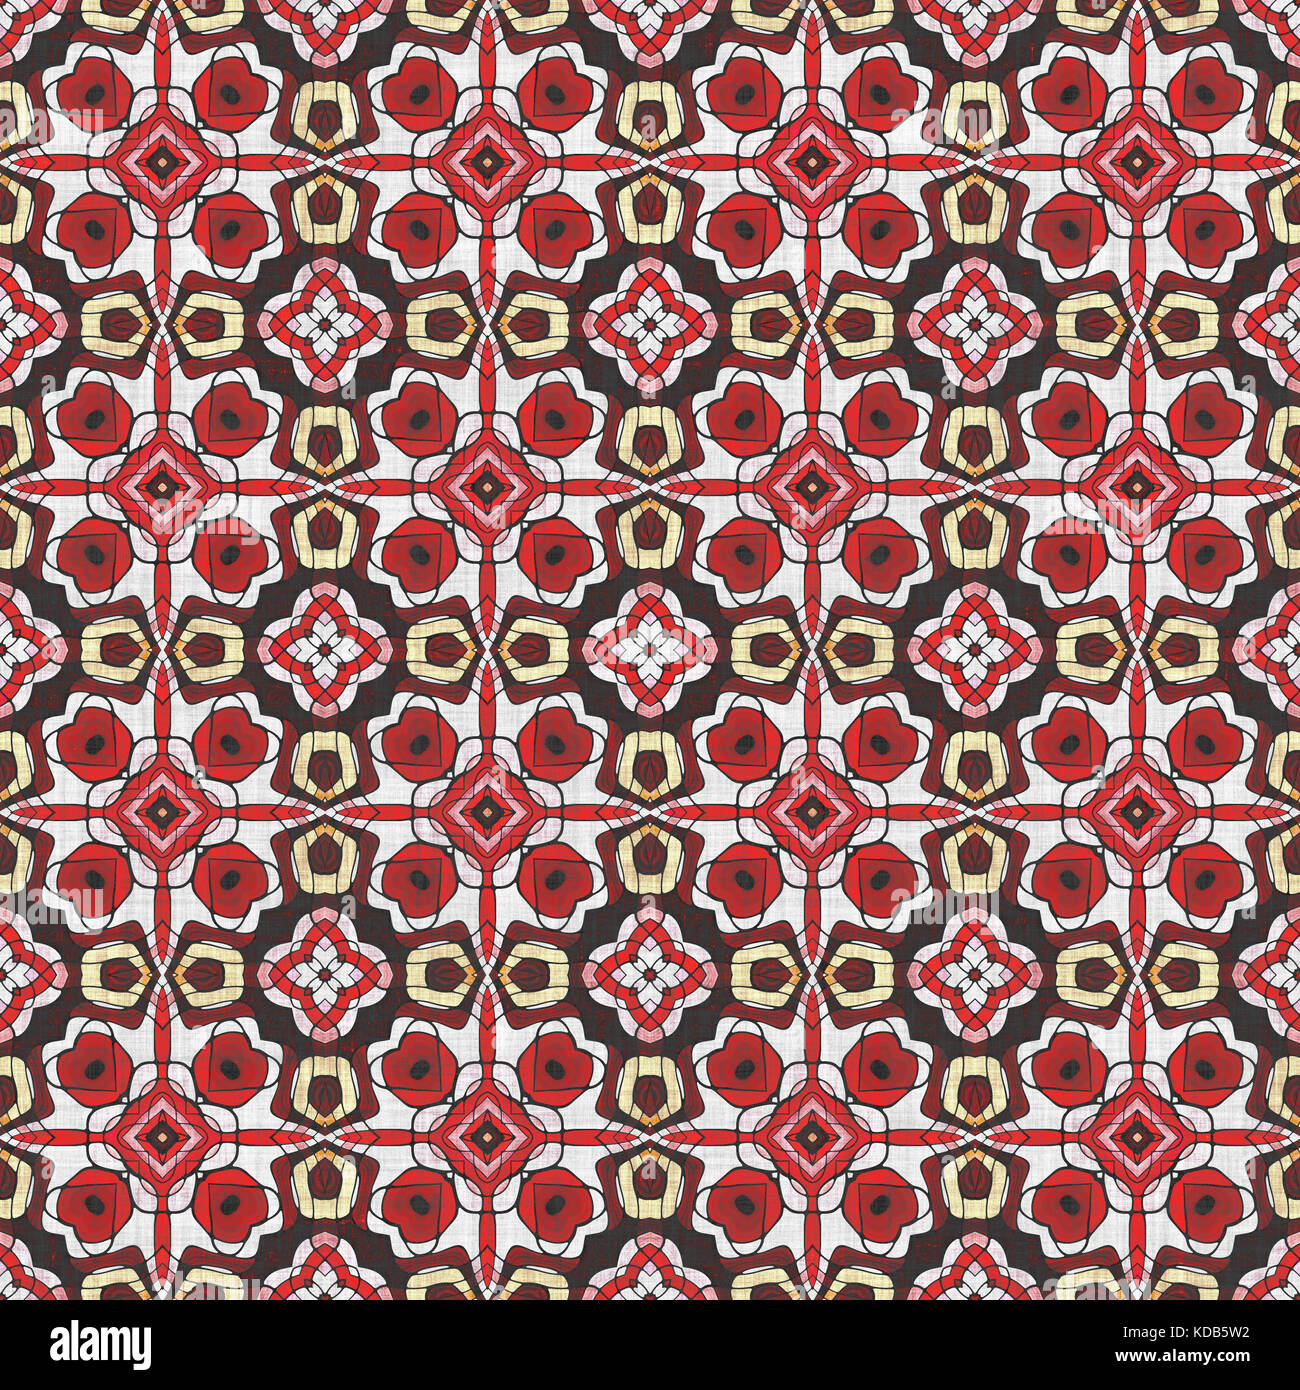 COlorful printed fabric with red and brown pattern Stock Photo